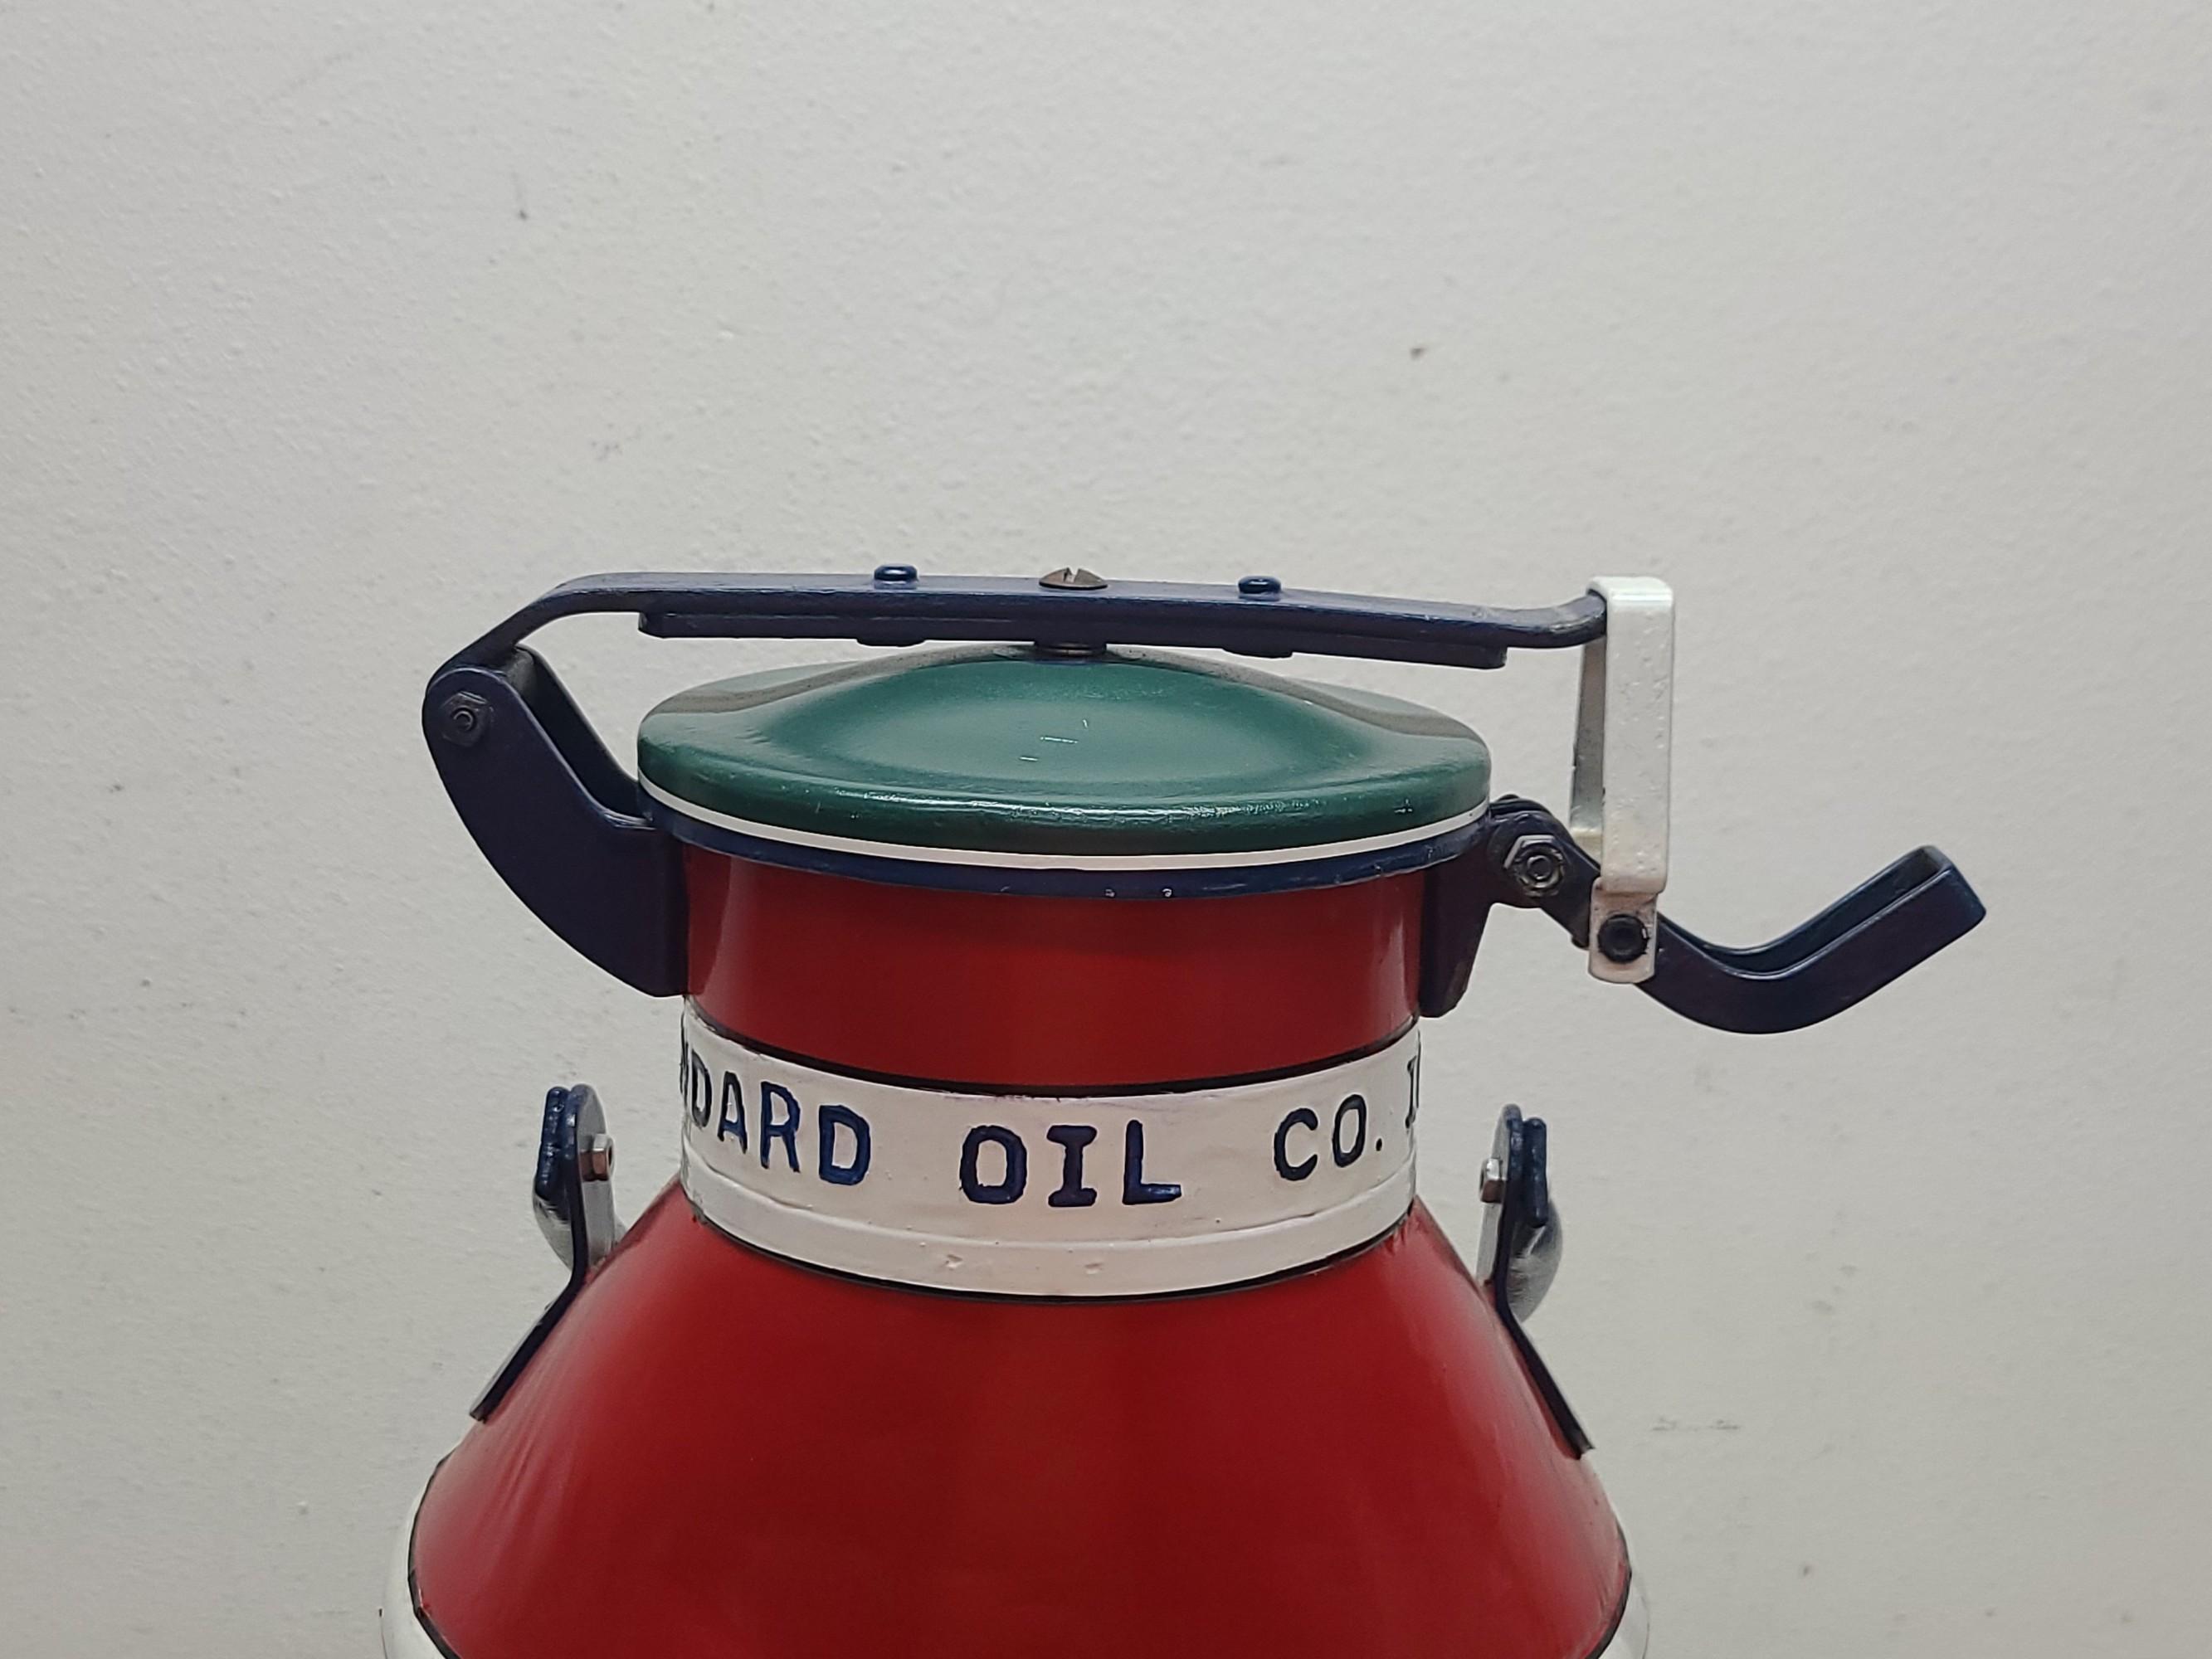 Standard Oil 5 Gallon Can with Locking Lid